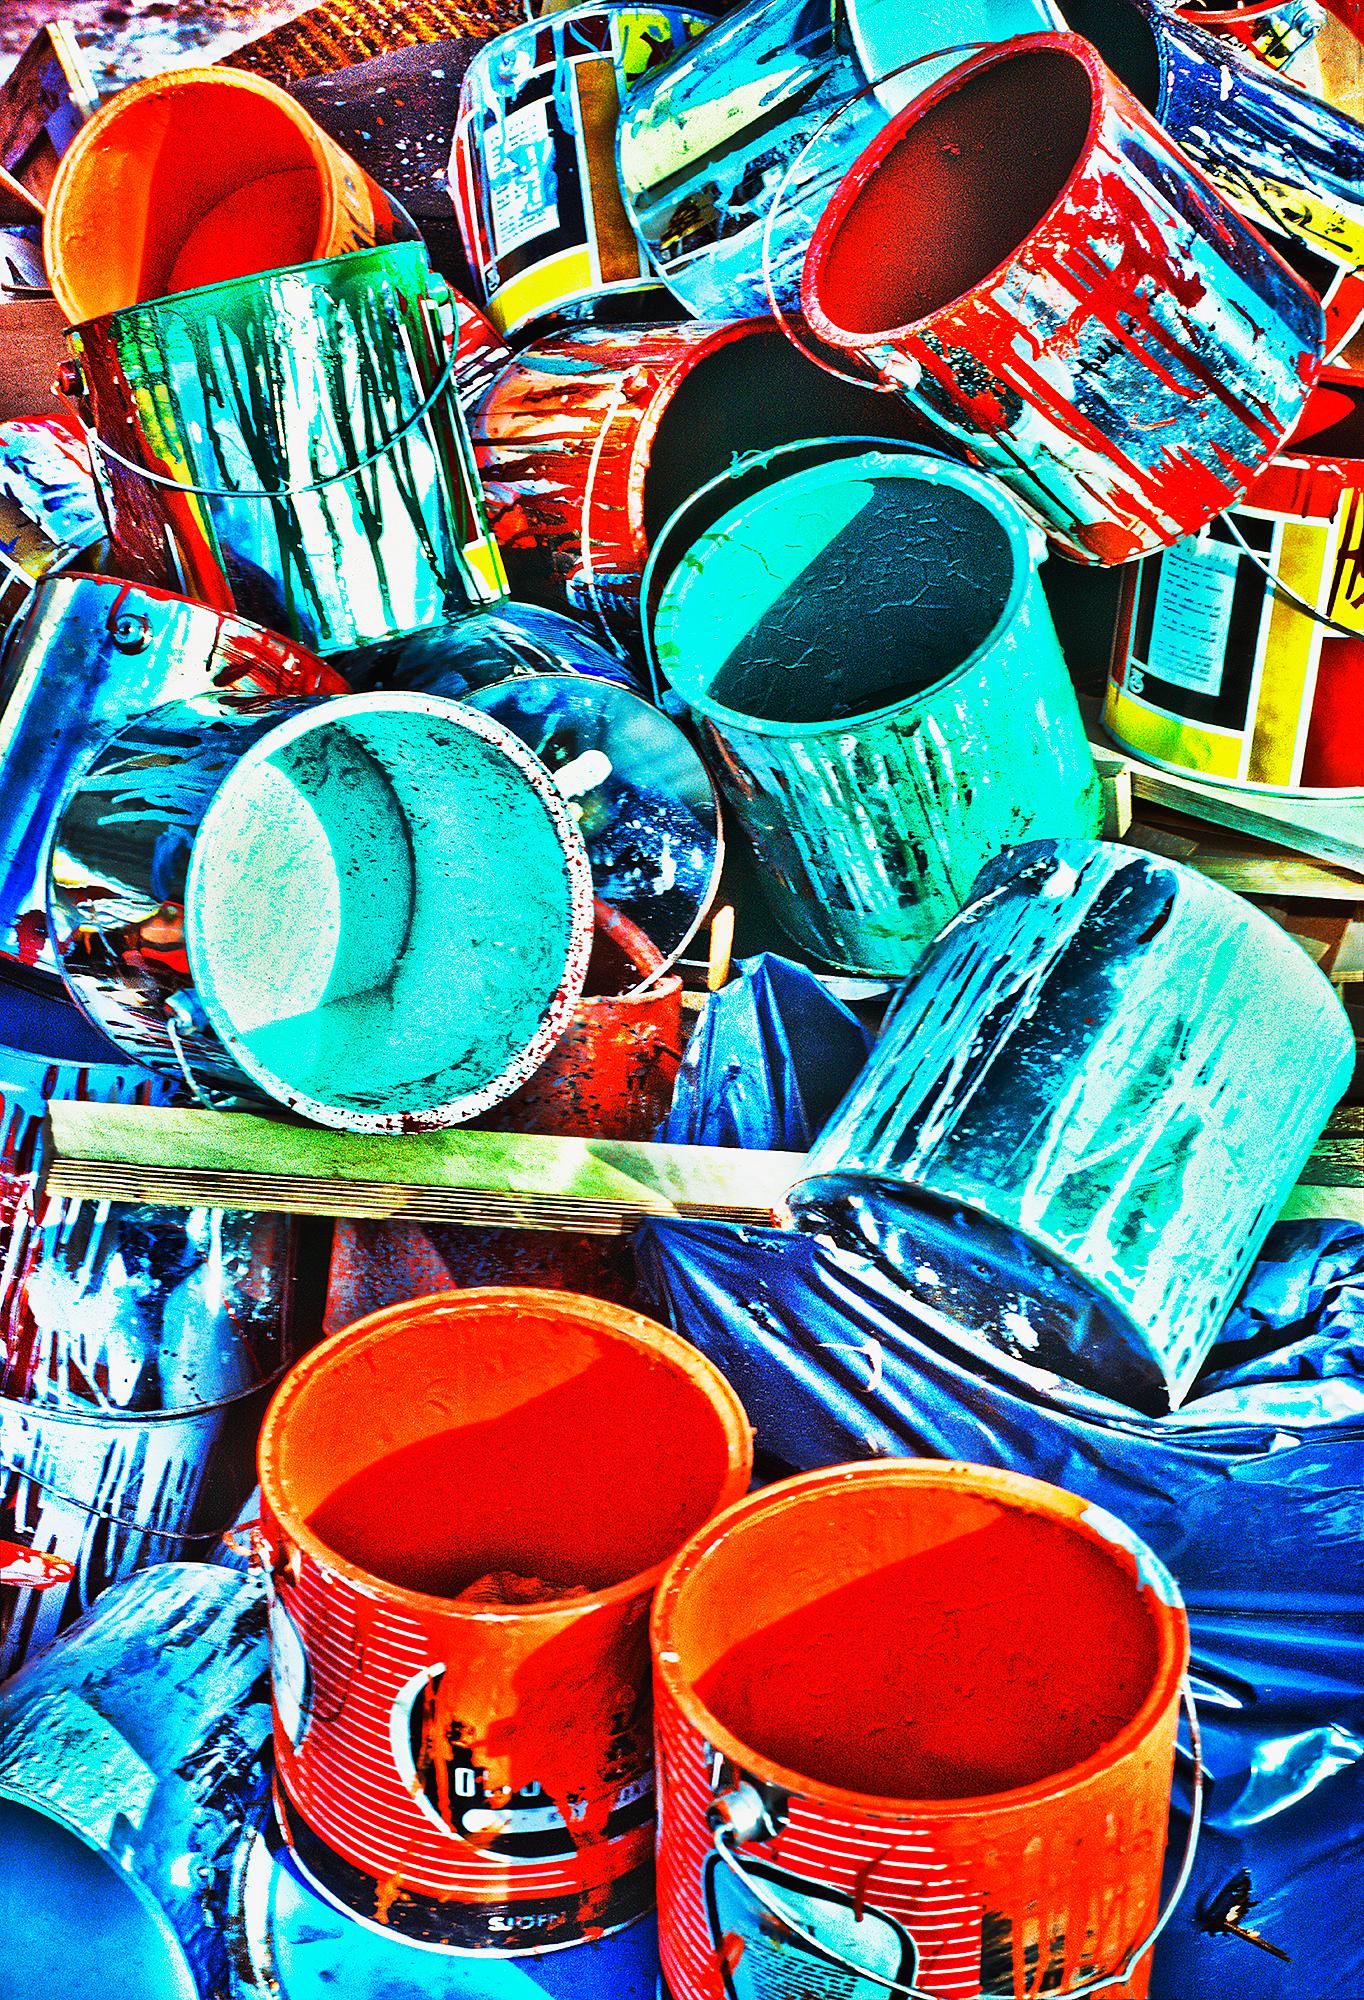 Colorful Paint Cans in Red, Orange, Blue and Turquoise 